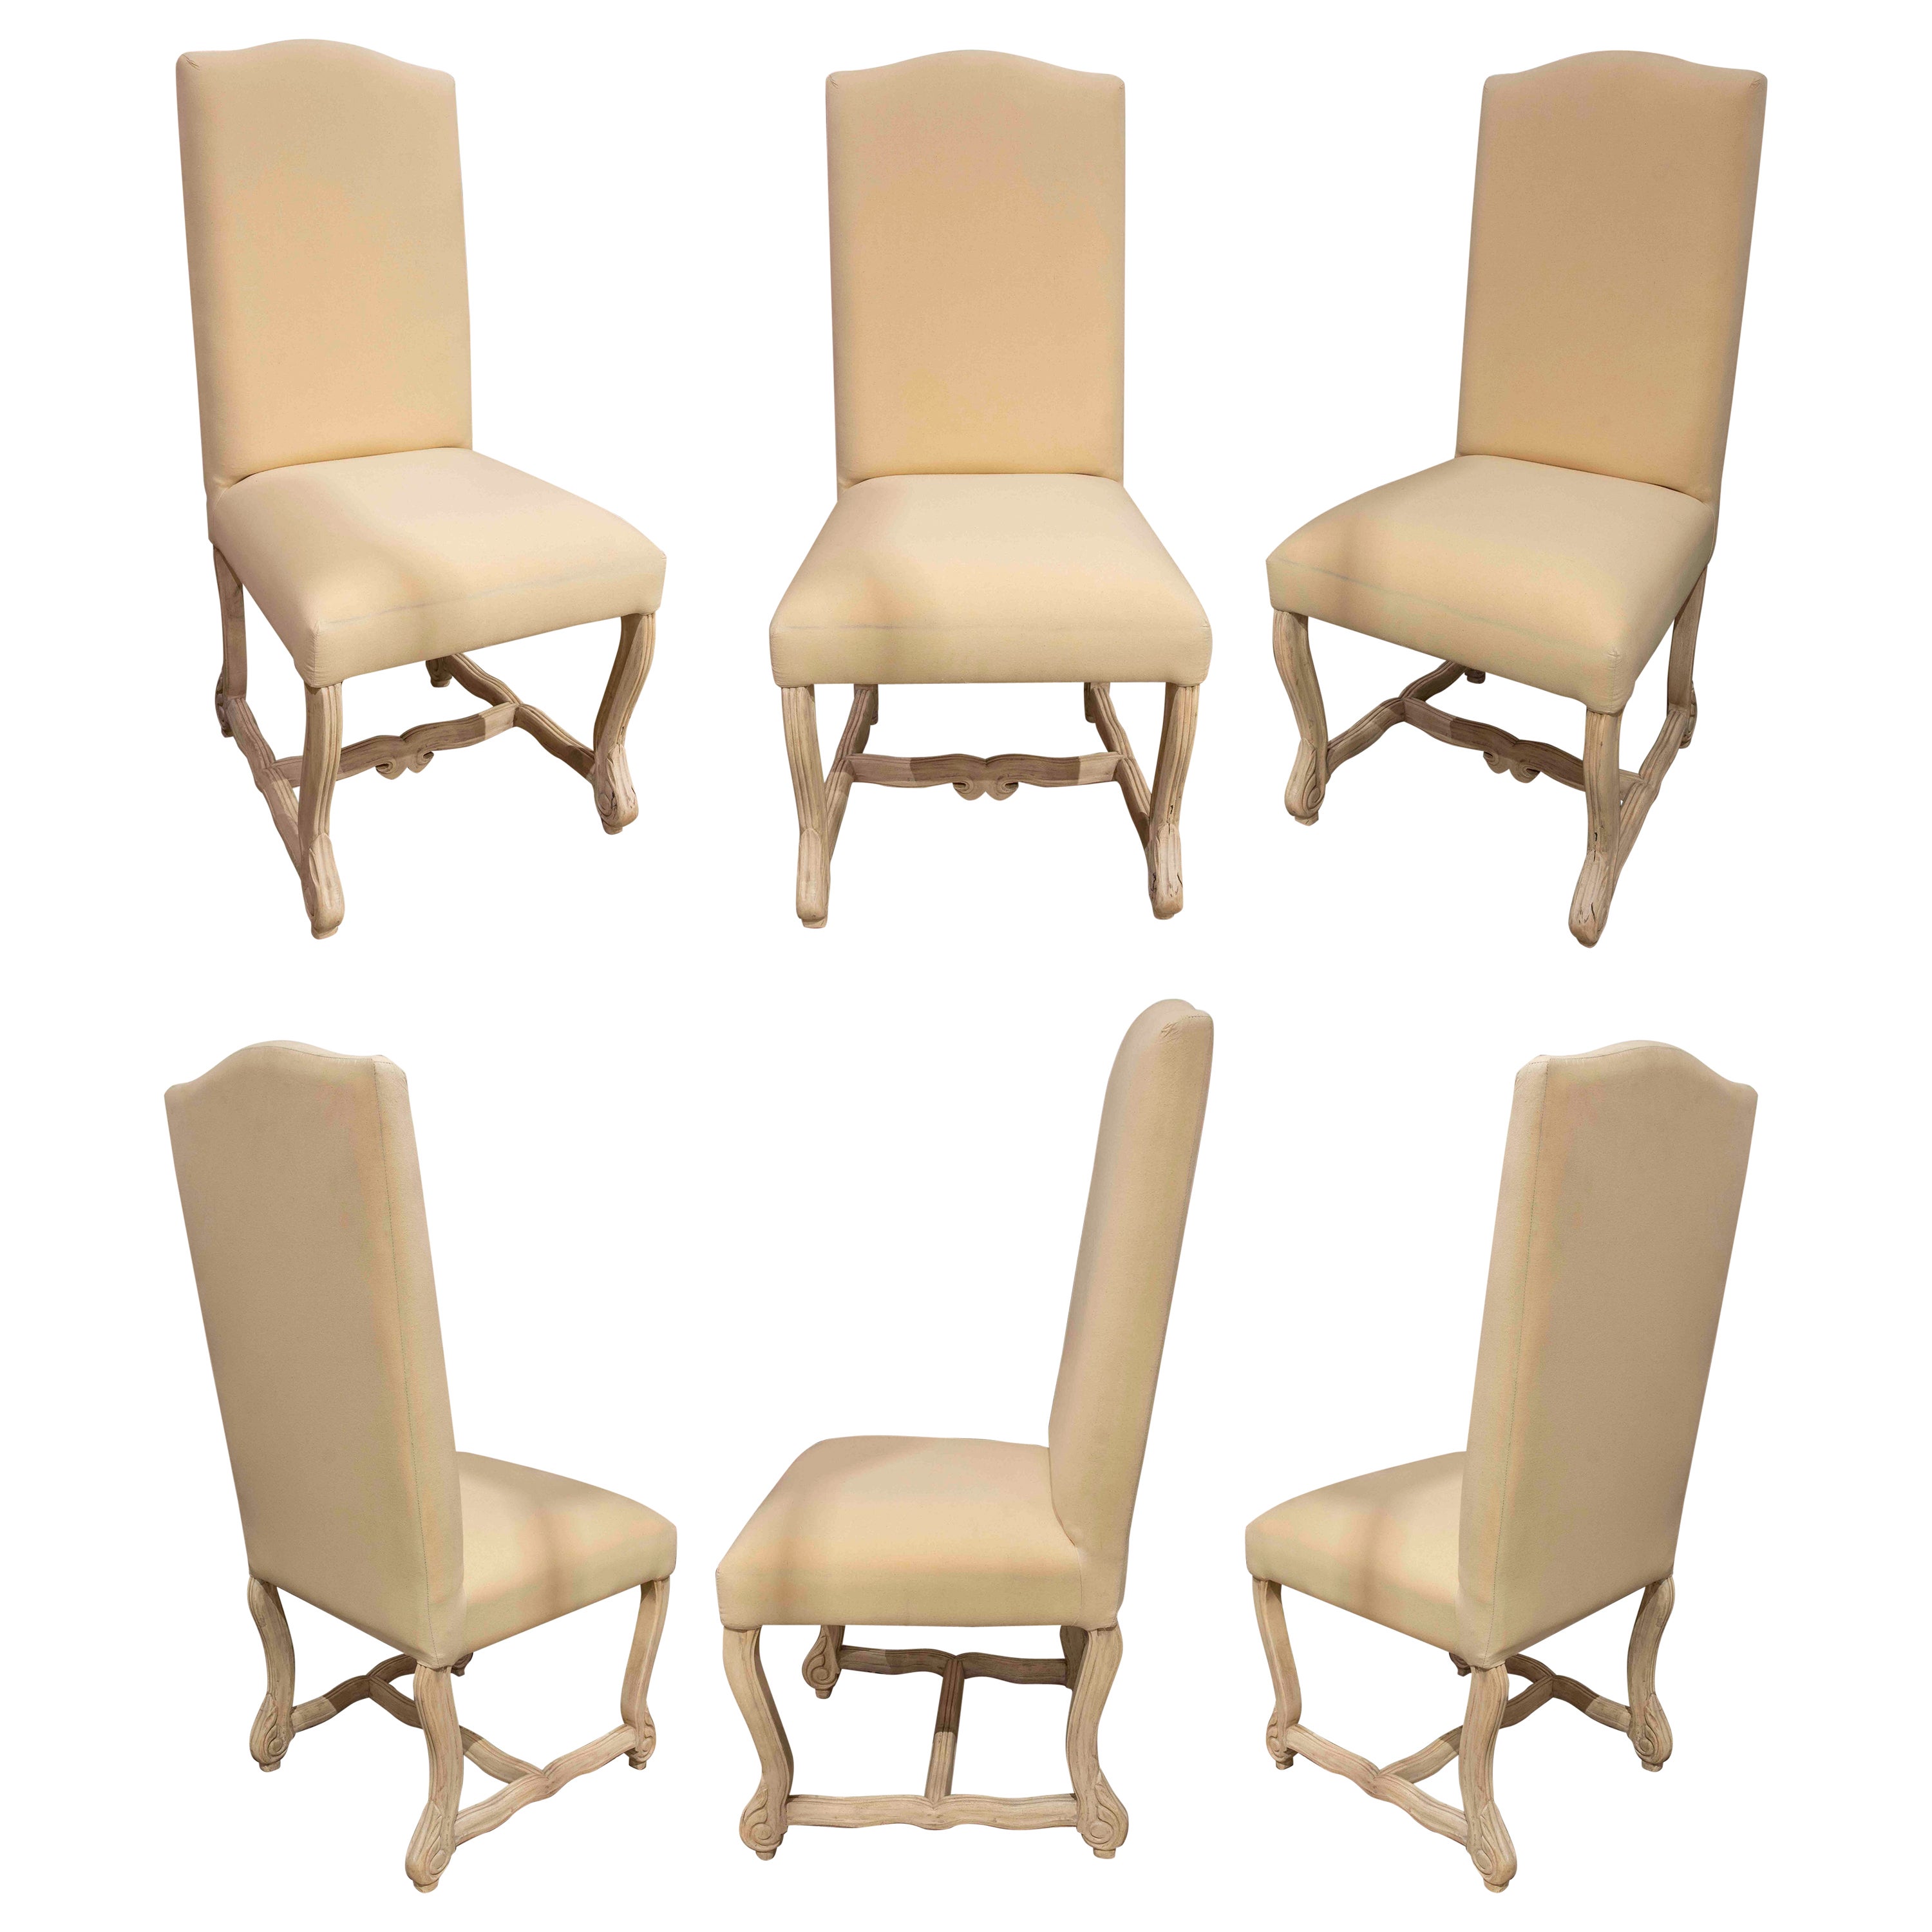 Set of Six Wooden High Backed Dining Chairs for Upholstery